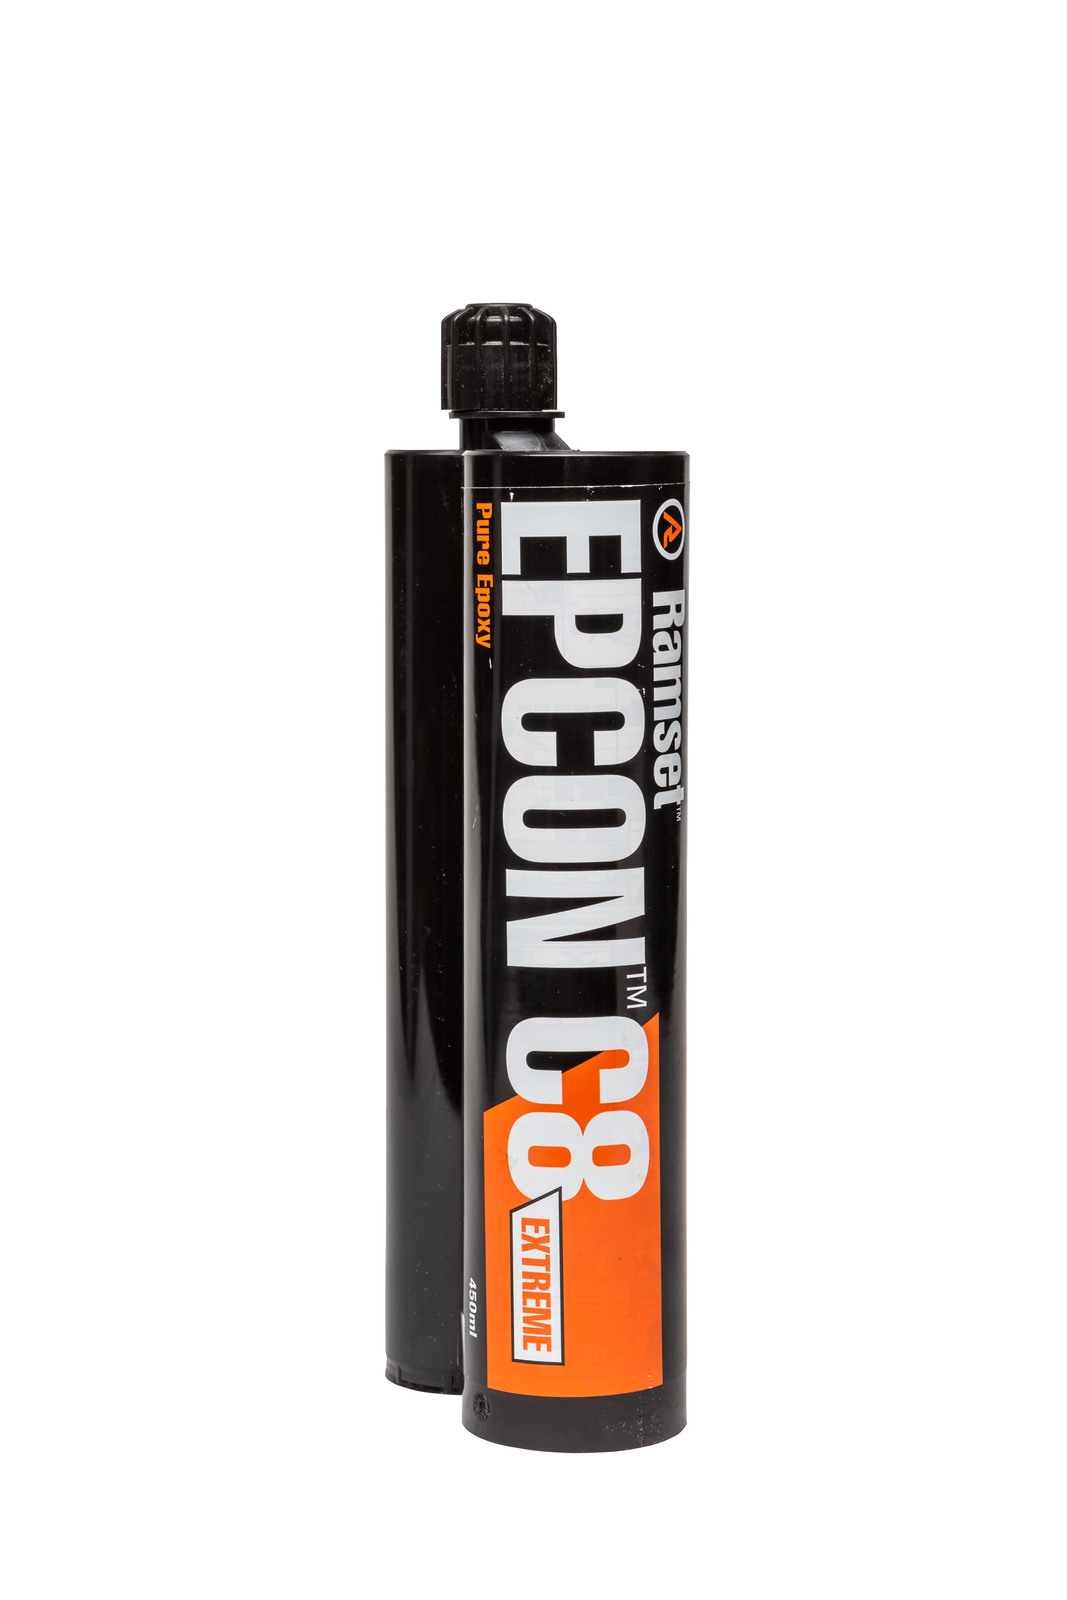 Ramset Epcon C8 Extreme Fast Curing Epoxy 450ml | GFC Fasteners ...